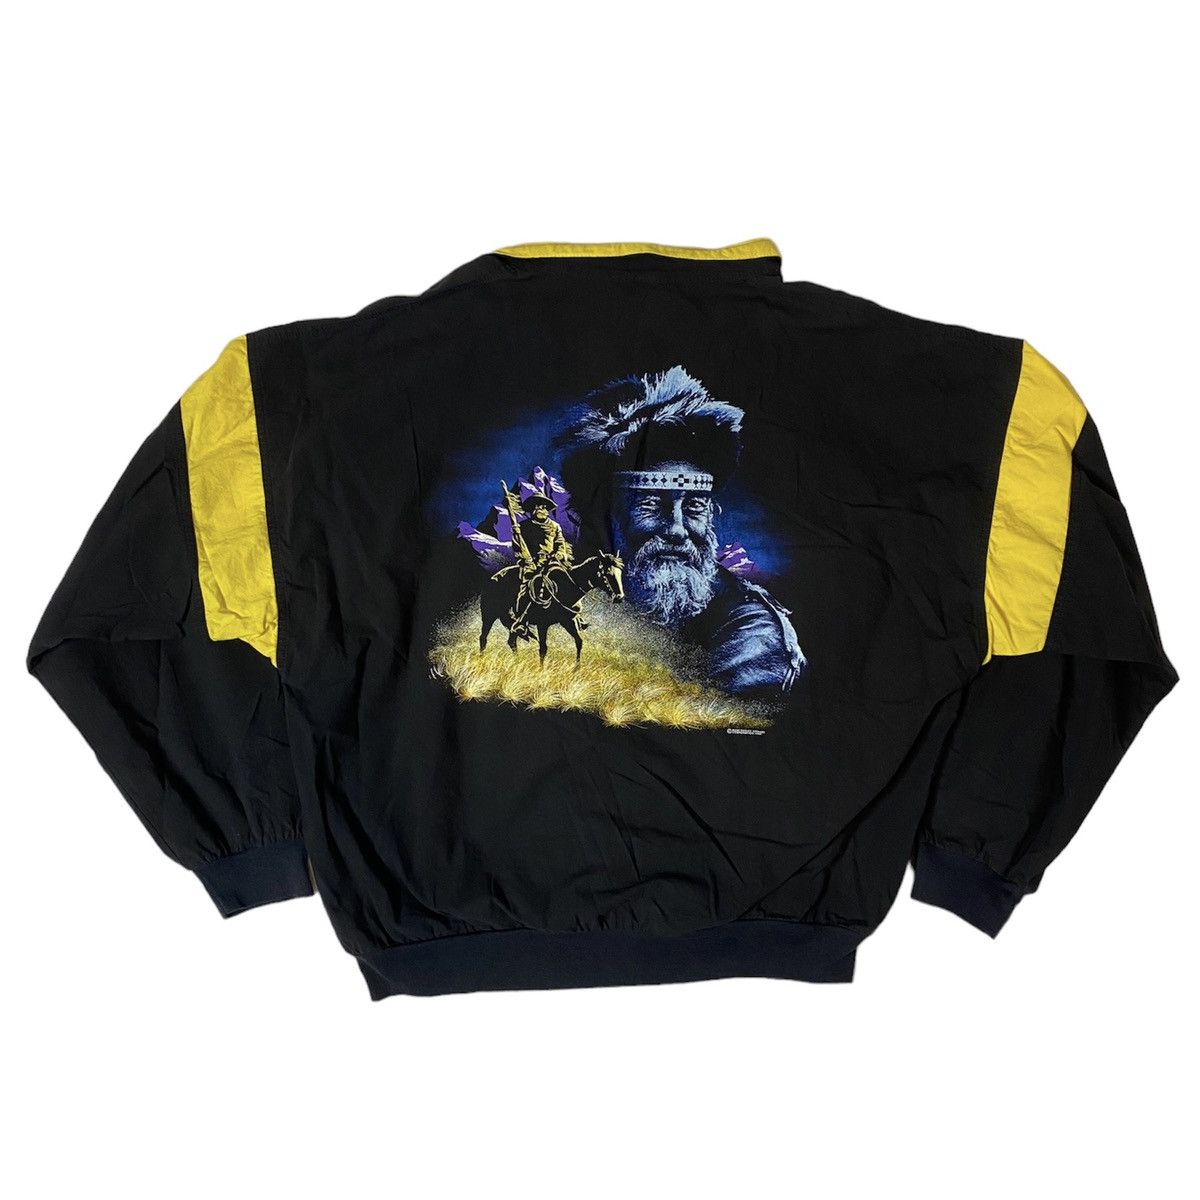 Vintage 1994 Black/Yellow Western Pullover Size US L / EU 52-54 / 3 - 1 Preview